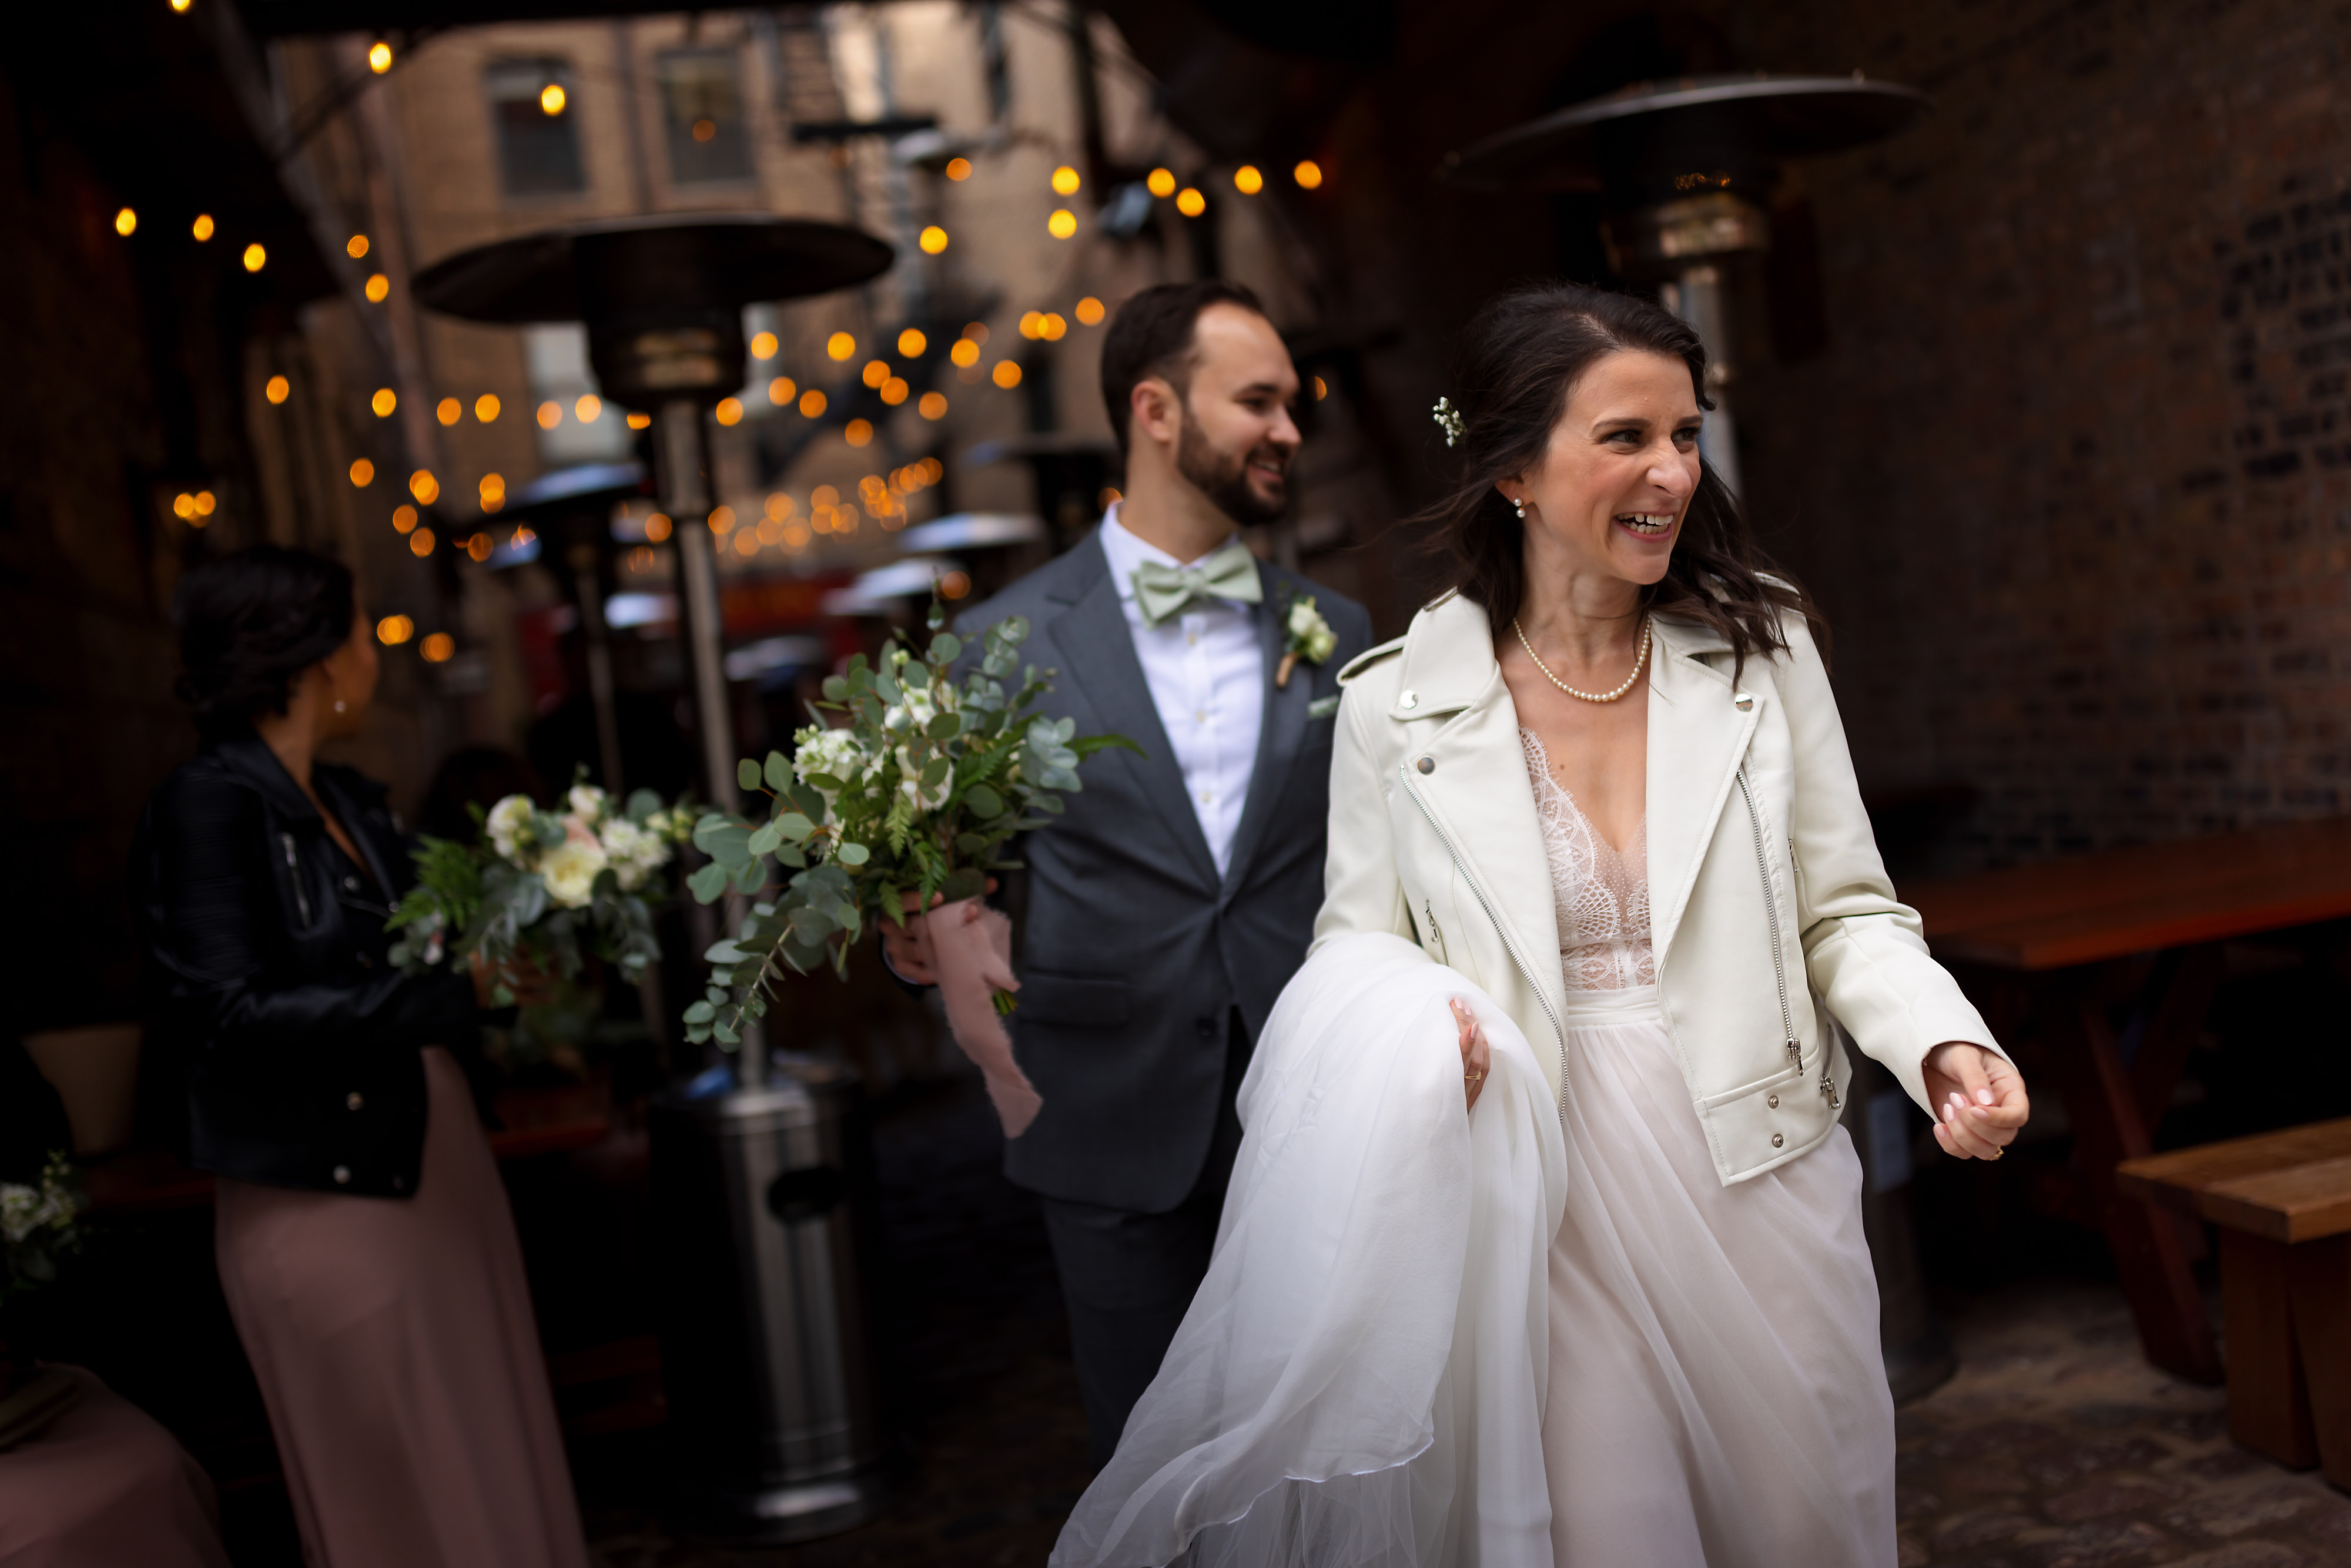 Bride and groom leave Green Street Smoked Meats in Chicago's West Loop neighborhood after taking wedding portraits.